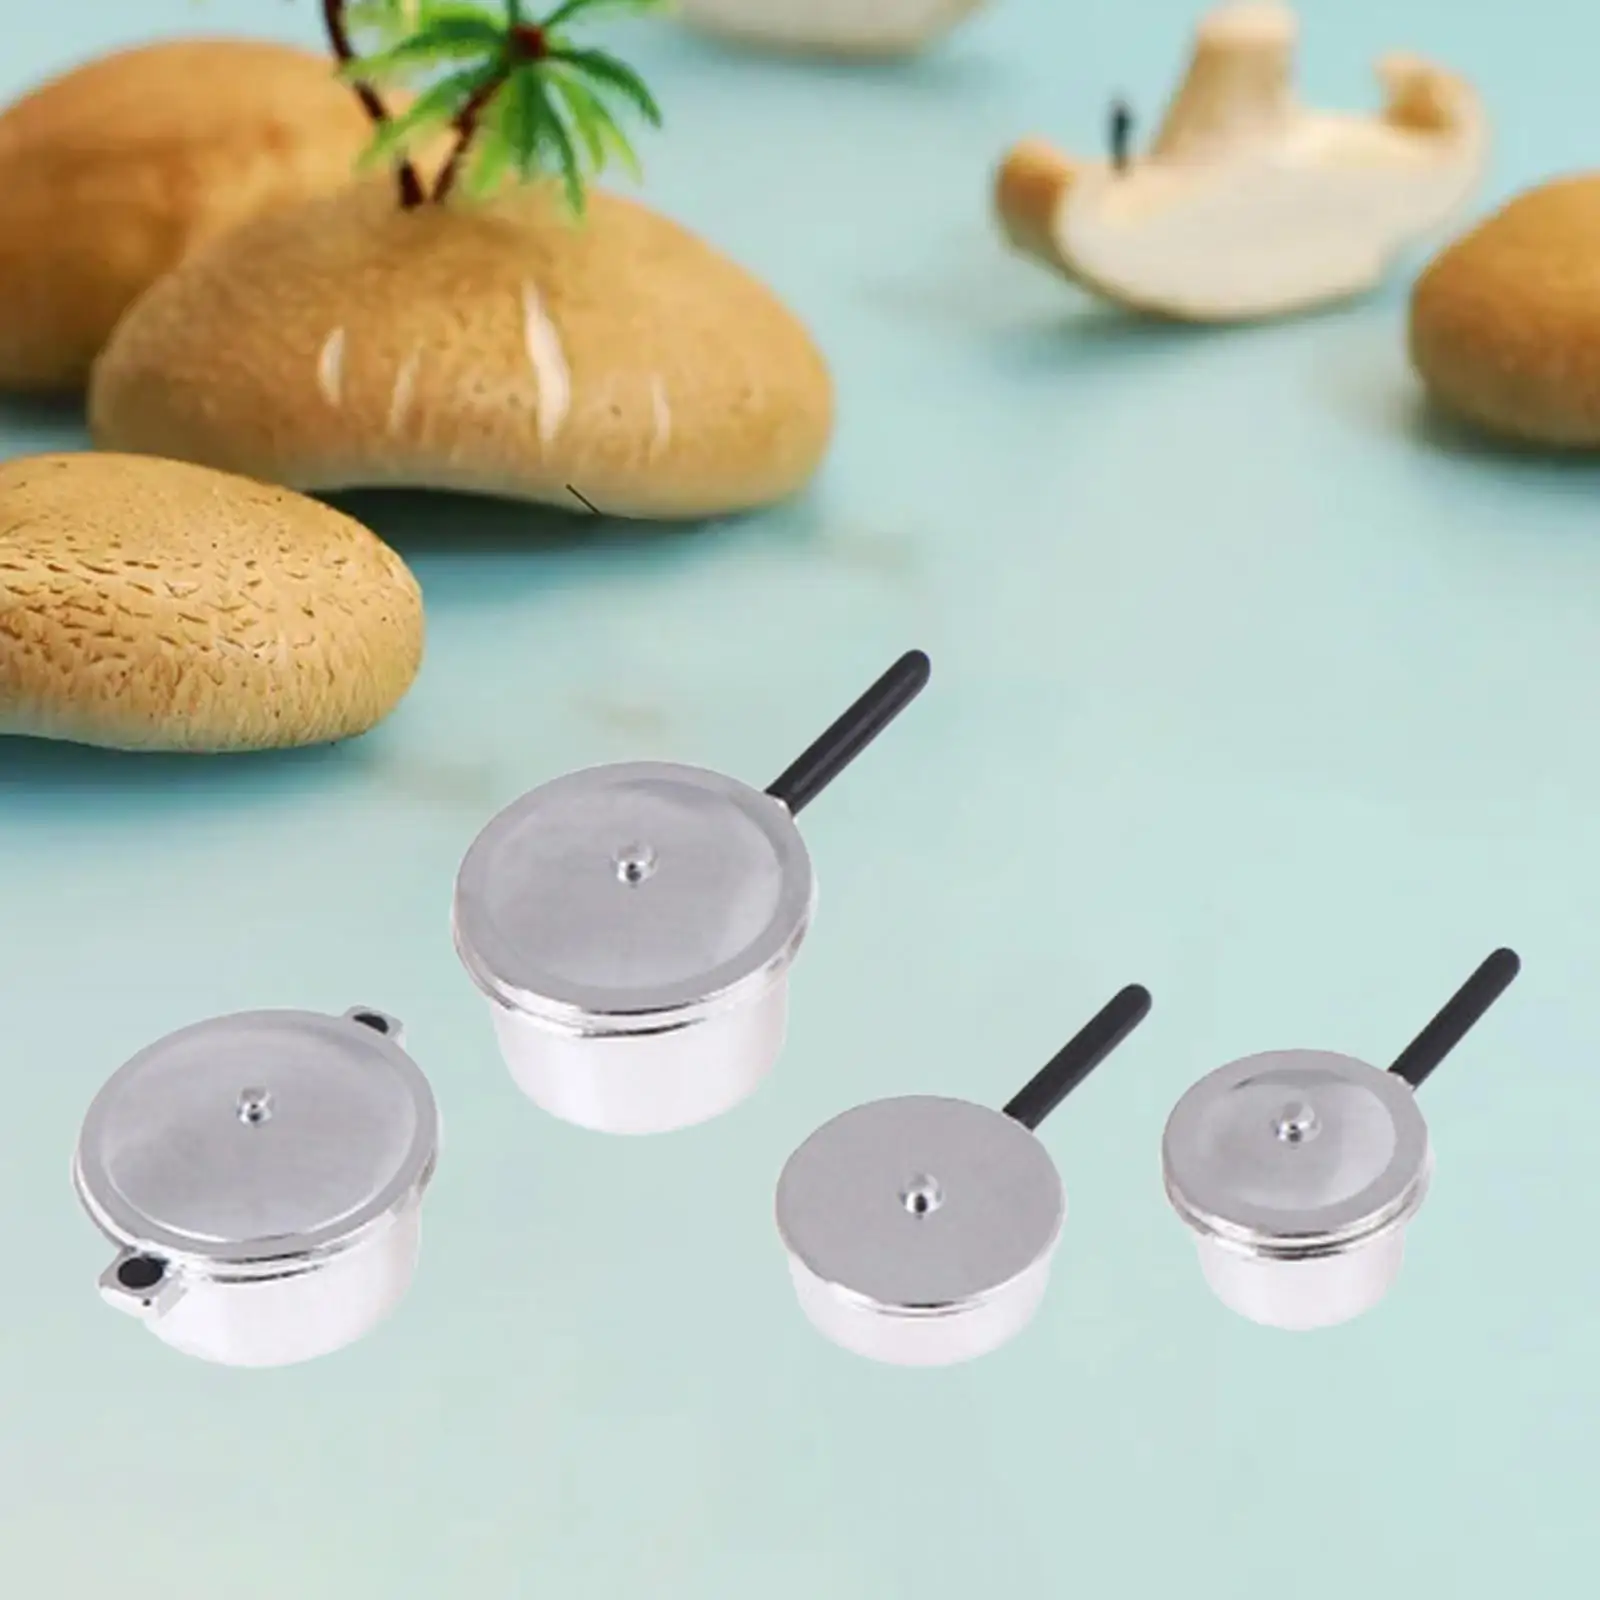 4Pcs 1:12 Dollhouse Pots and Pans Mini Cooking Pan with Lids for Building Micro Landscape DIY Scenery Architectural Accessories